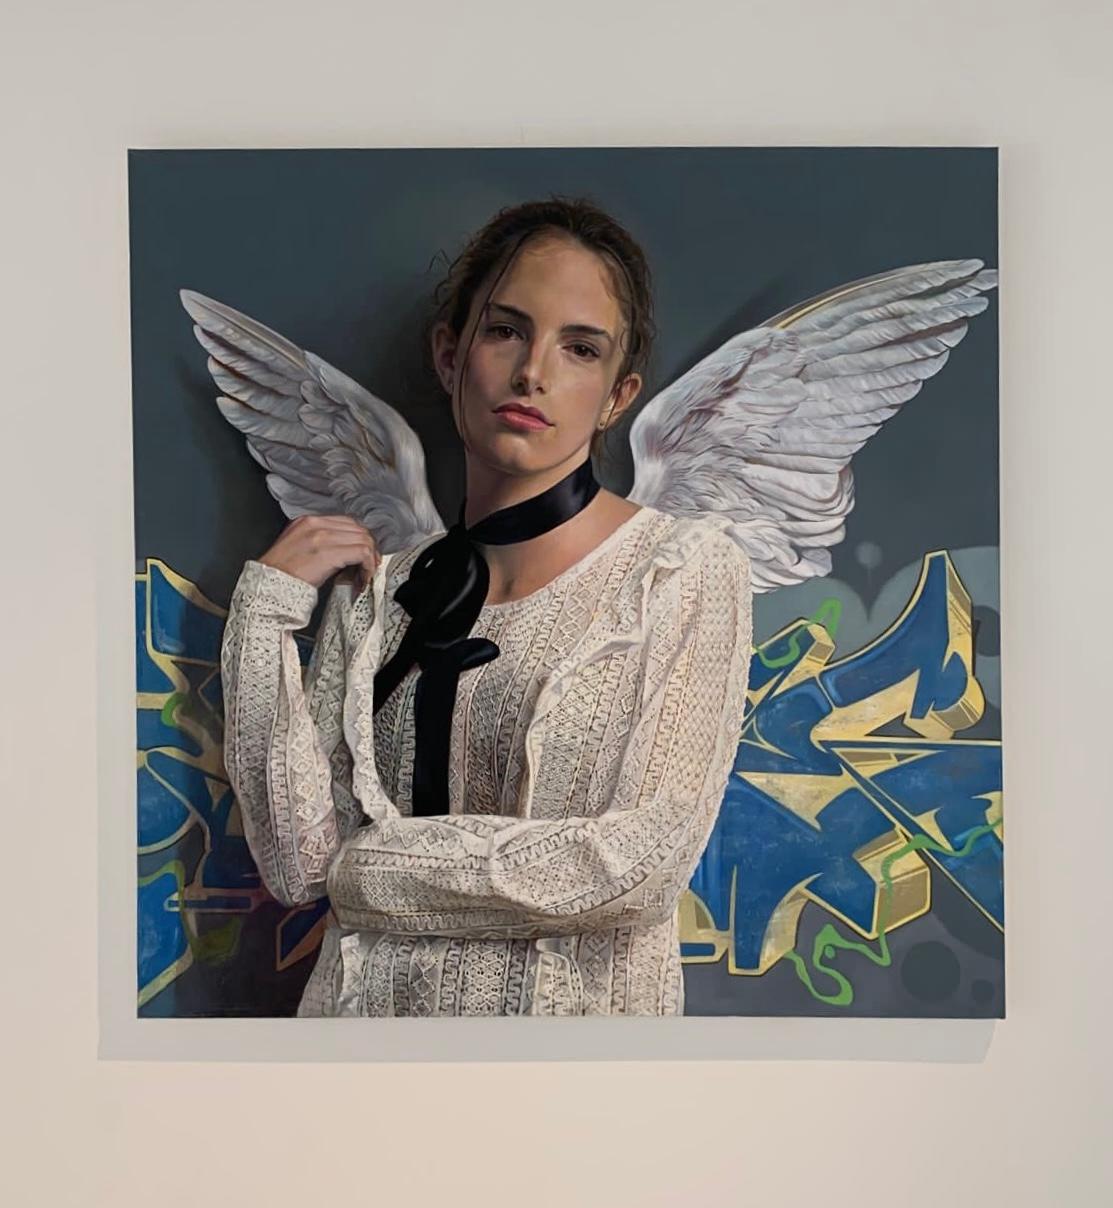 Fly Away is an oil painting by the Italian contemporary artist Mauro Maugliani. 

This work is typical of the artist's pictorial production. The painter, a graduate of the School of Fine Arts in Rome, has a traditional approach to painting both in